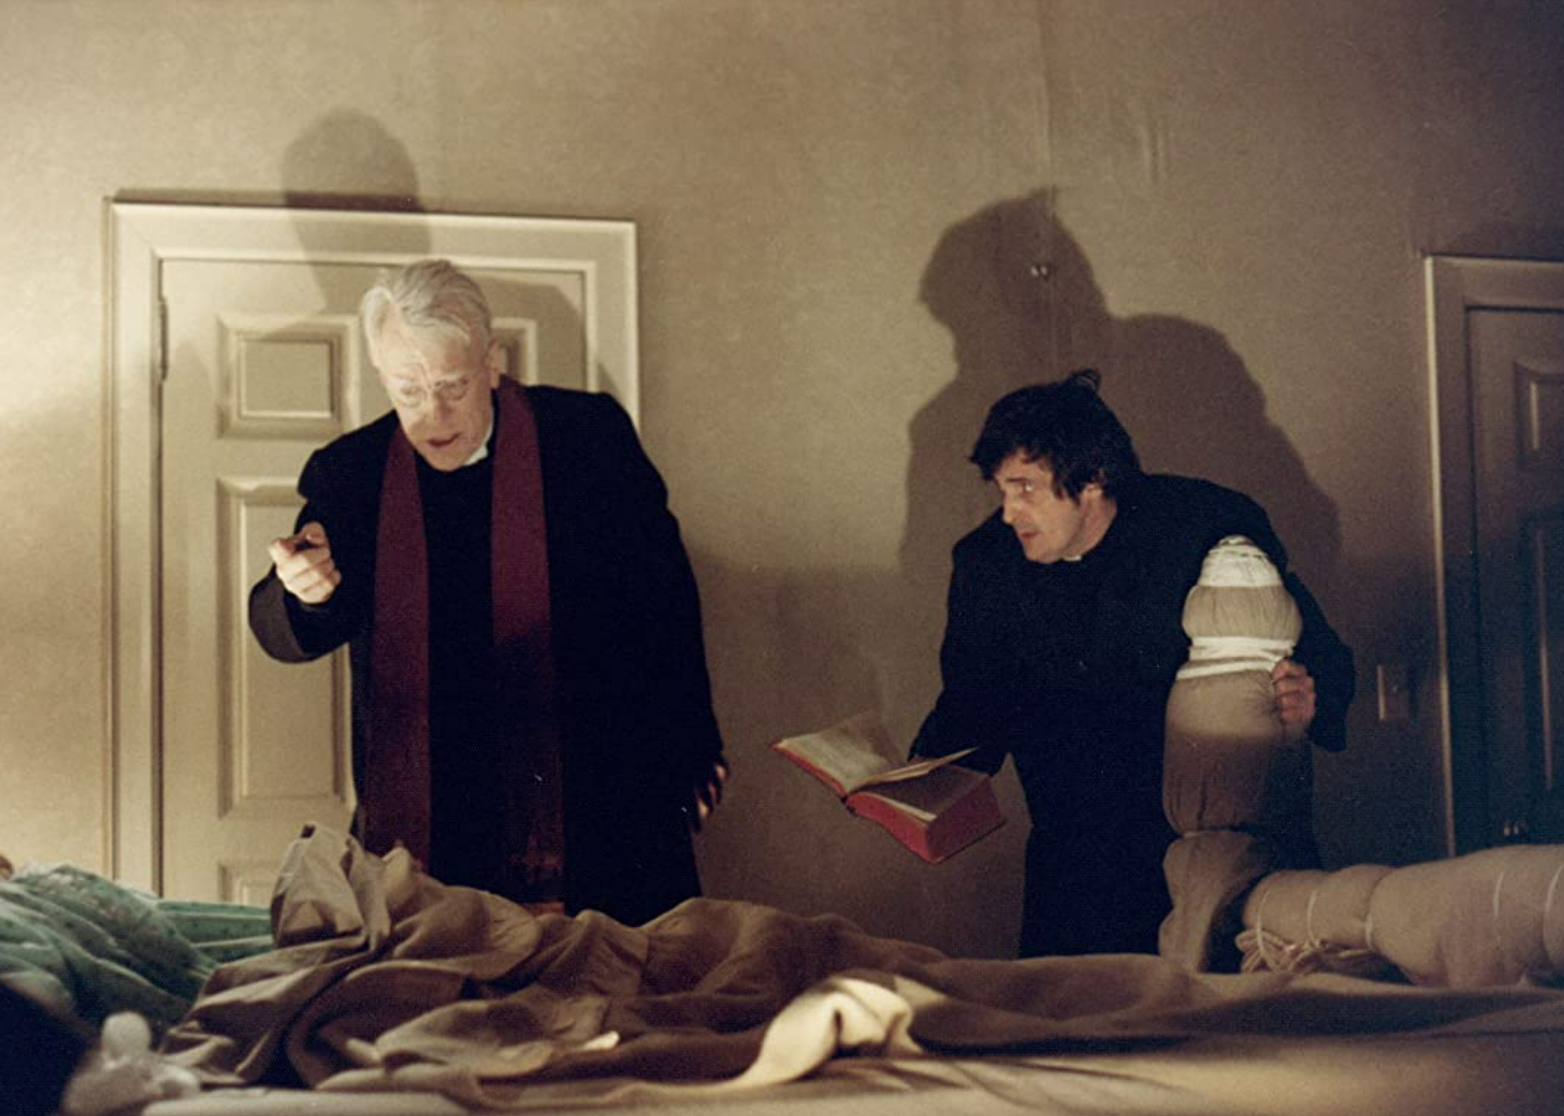 Linda Blair, Max von Sydow, and Jason Miller in a scene from "The Exorcist".